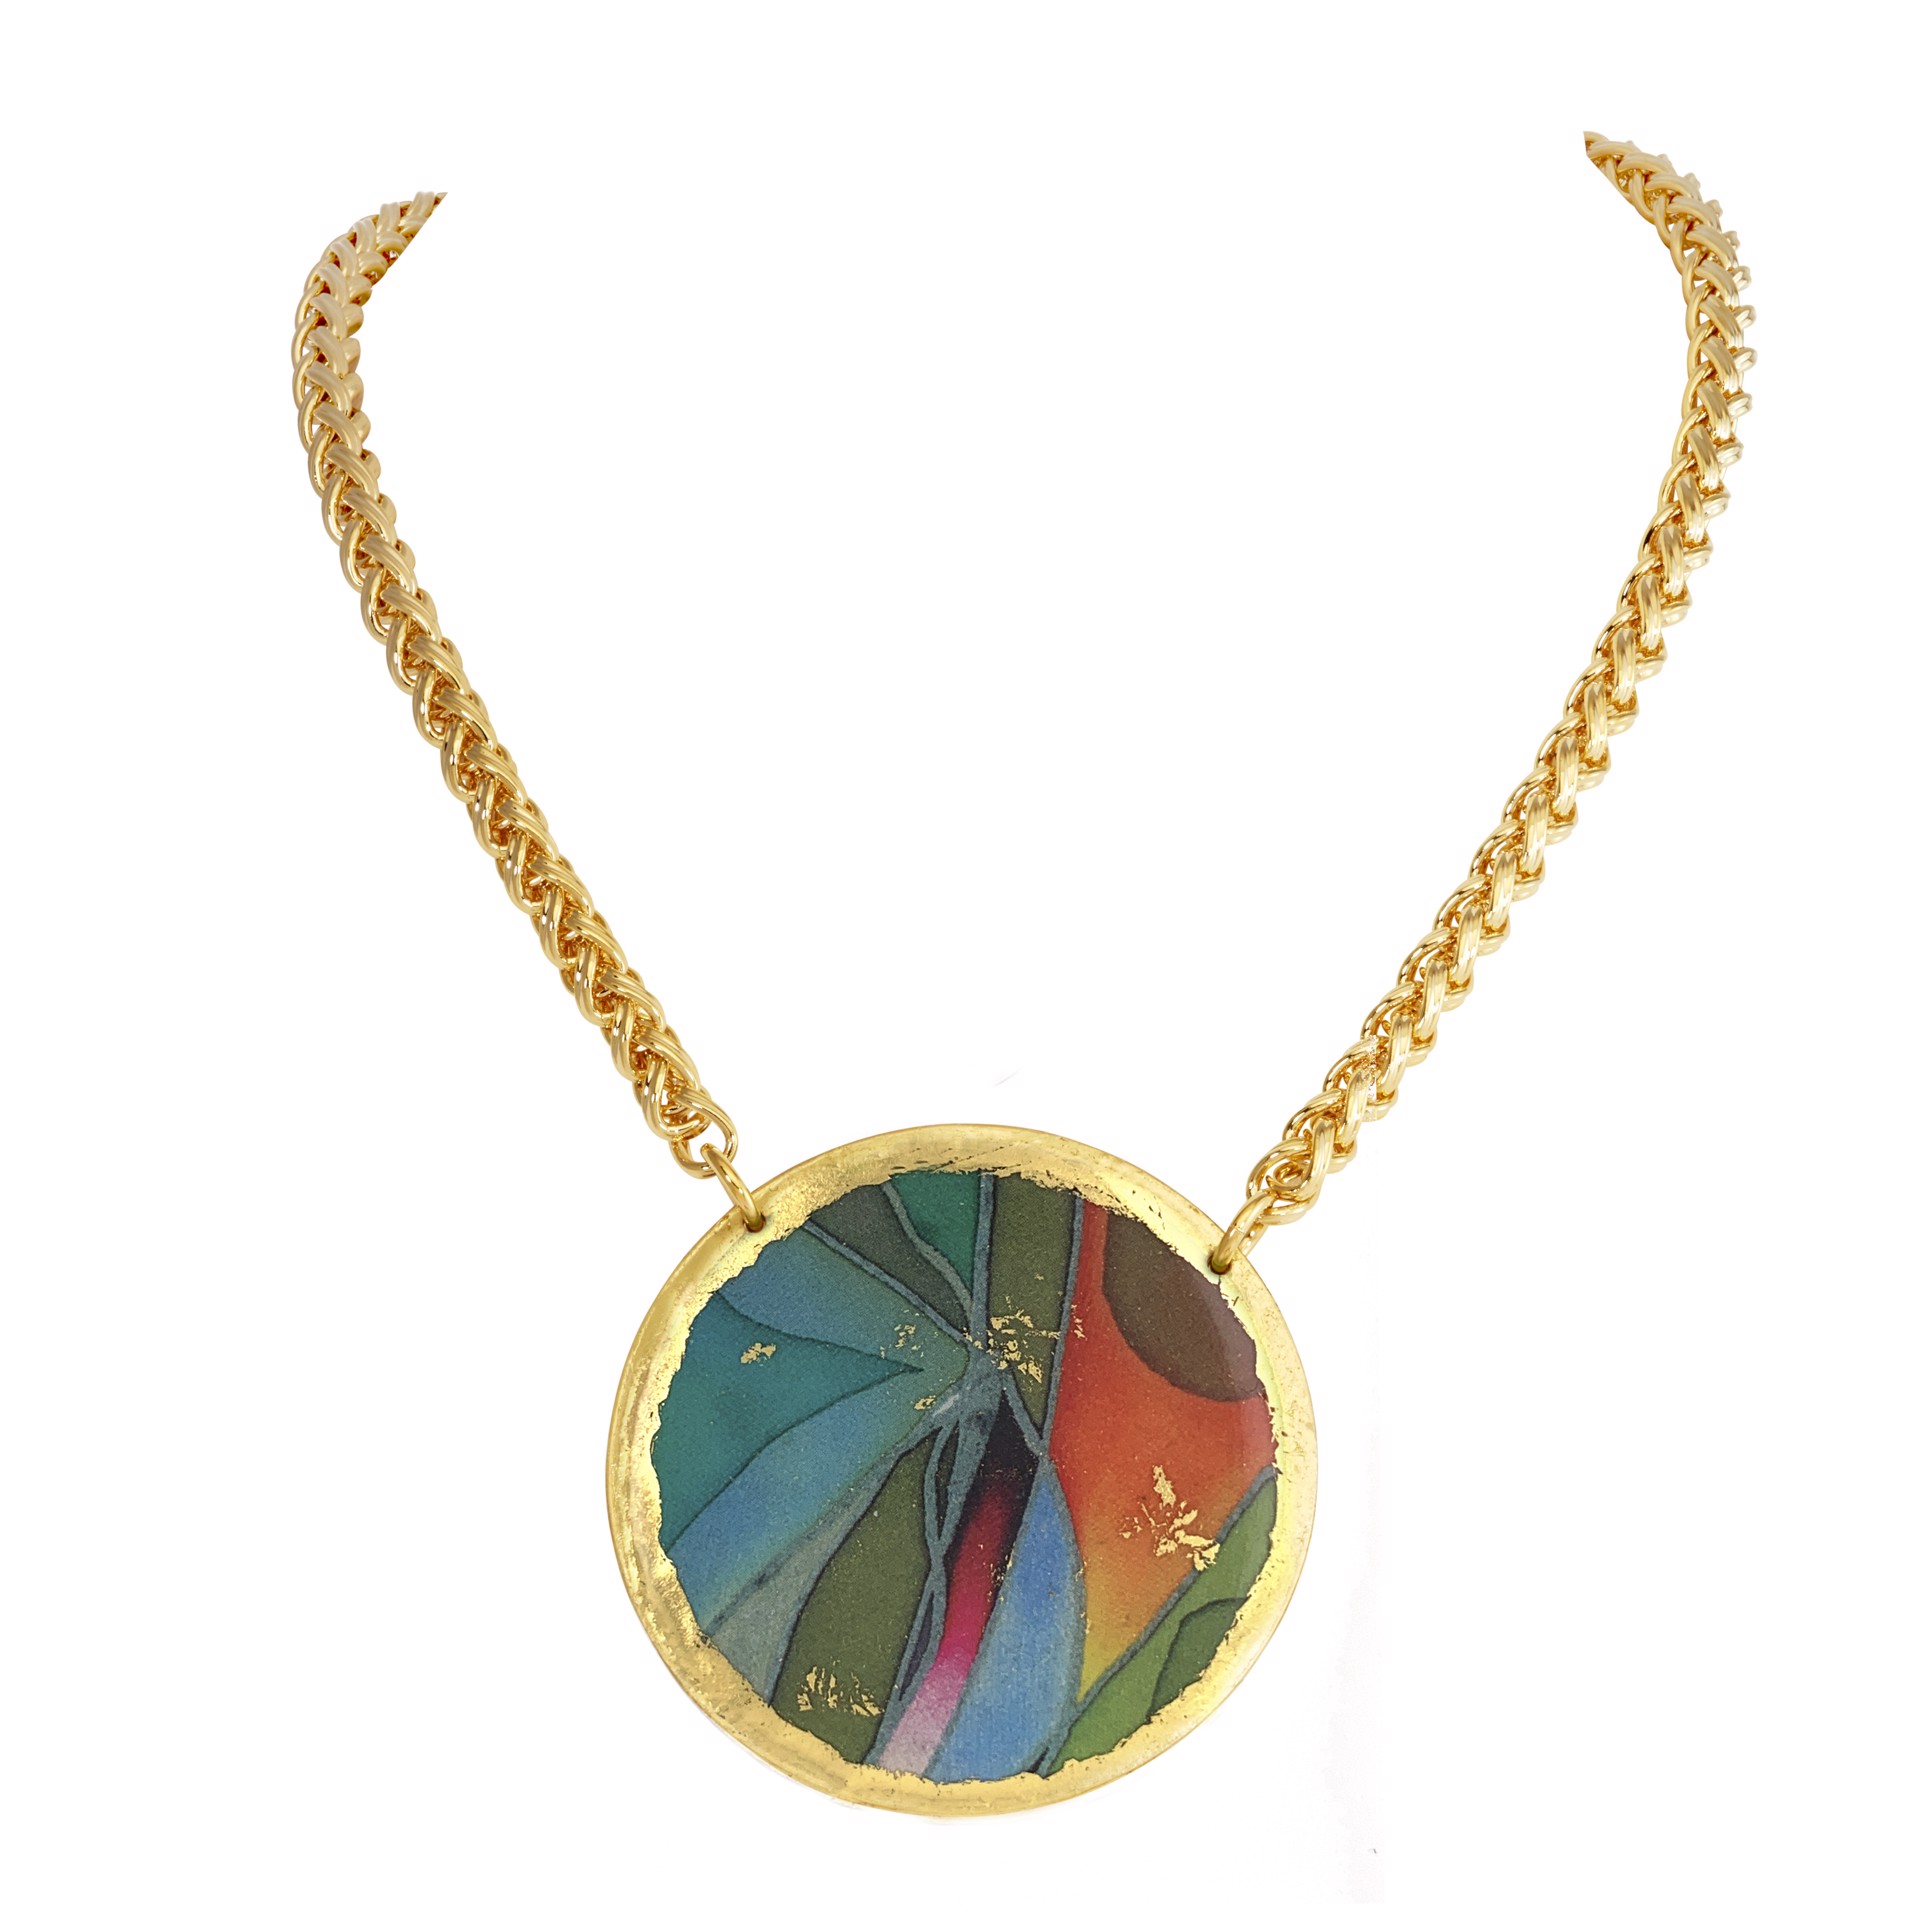 Rainforest Pendant Necklace - 2" Disc, 17" Chain with 2" Extender by Evocateur